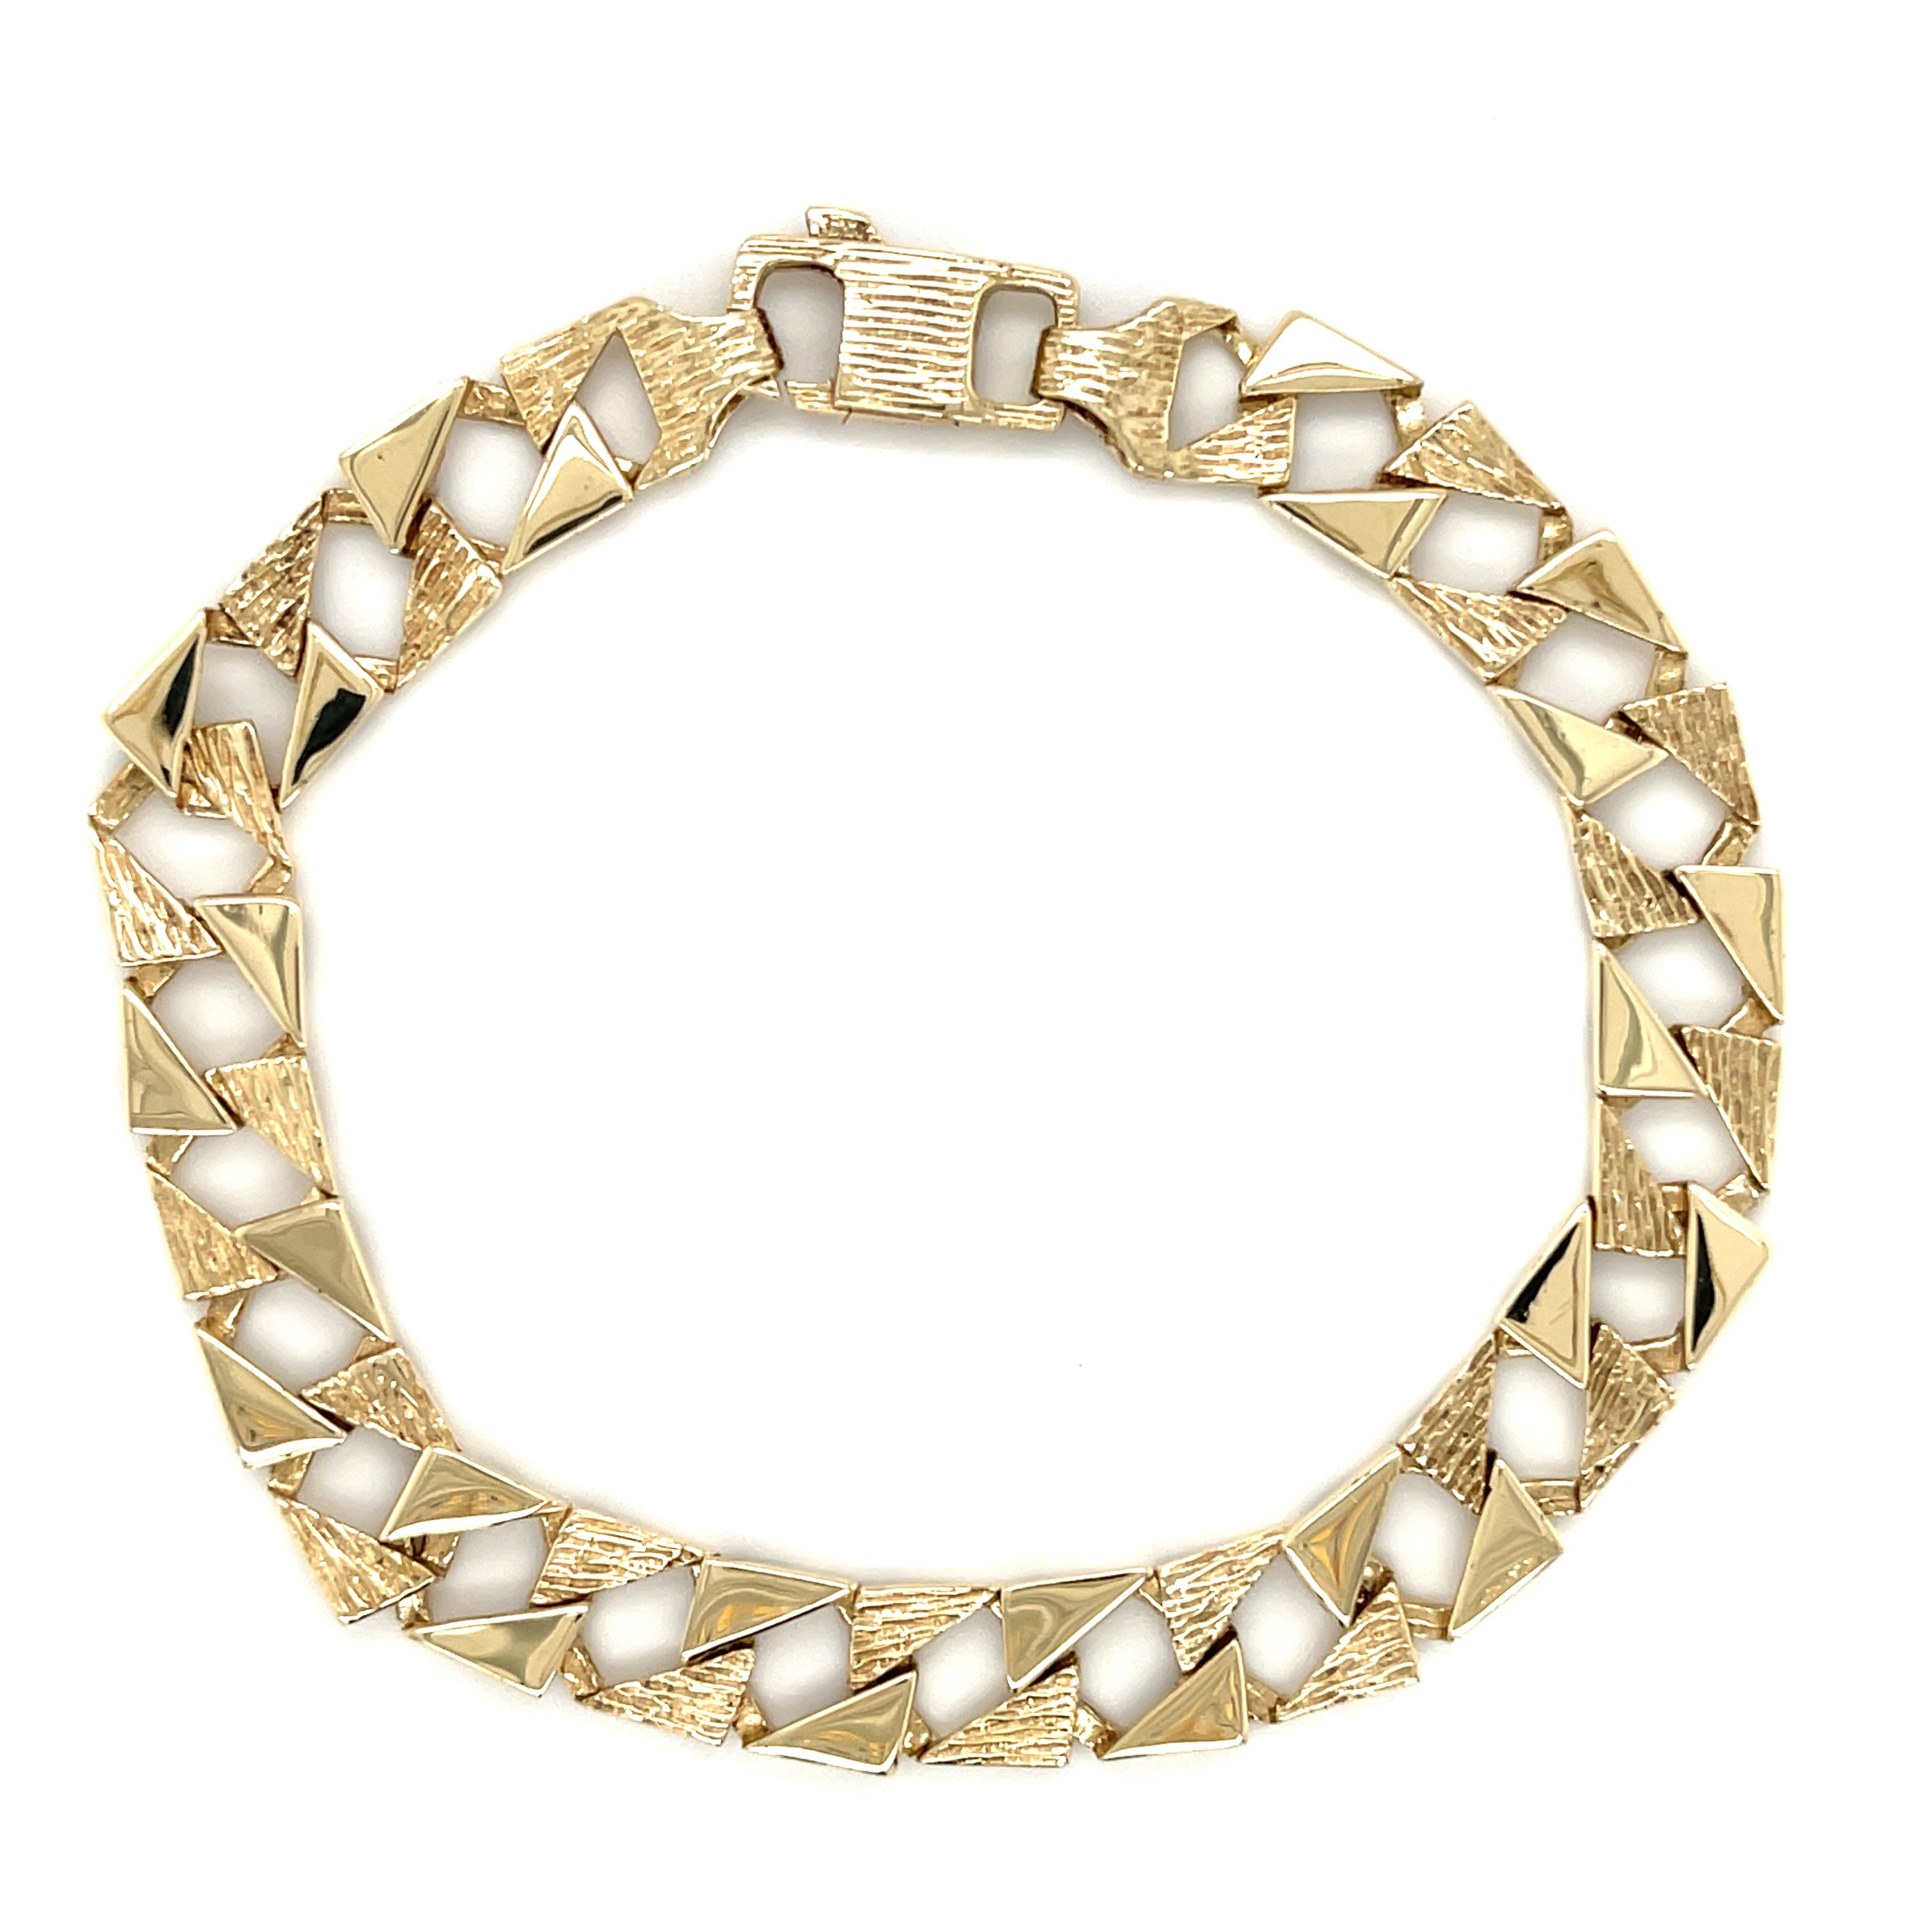 9ct Yellow Gold 8.25" Polish & Pattern Square Curb Link Bracelet - 13.55g SOLD